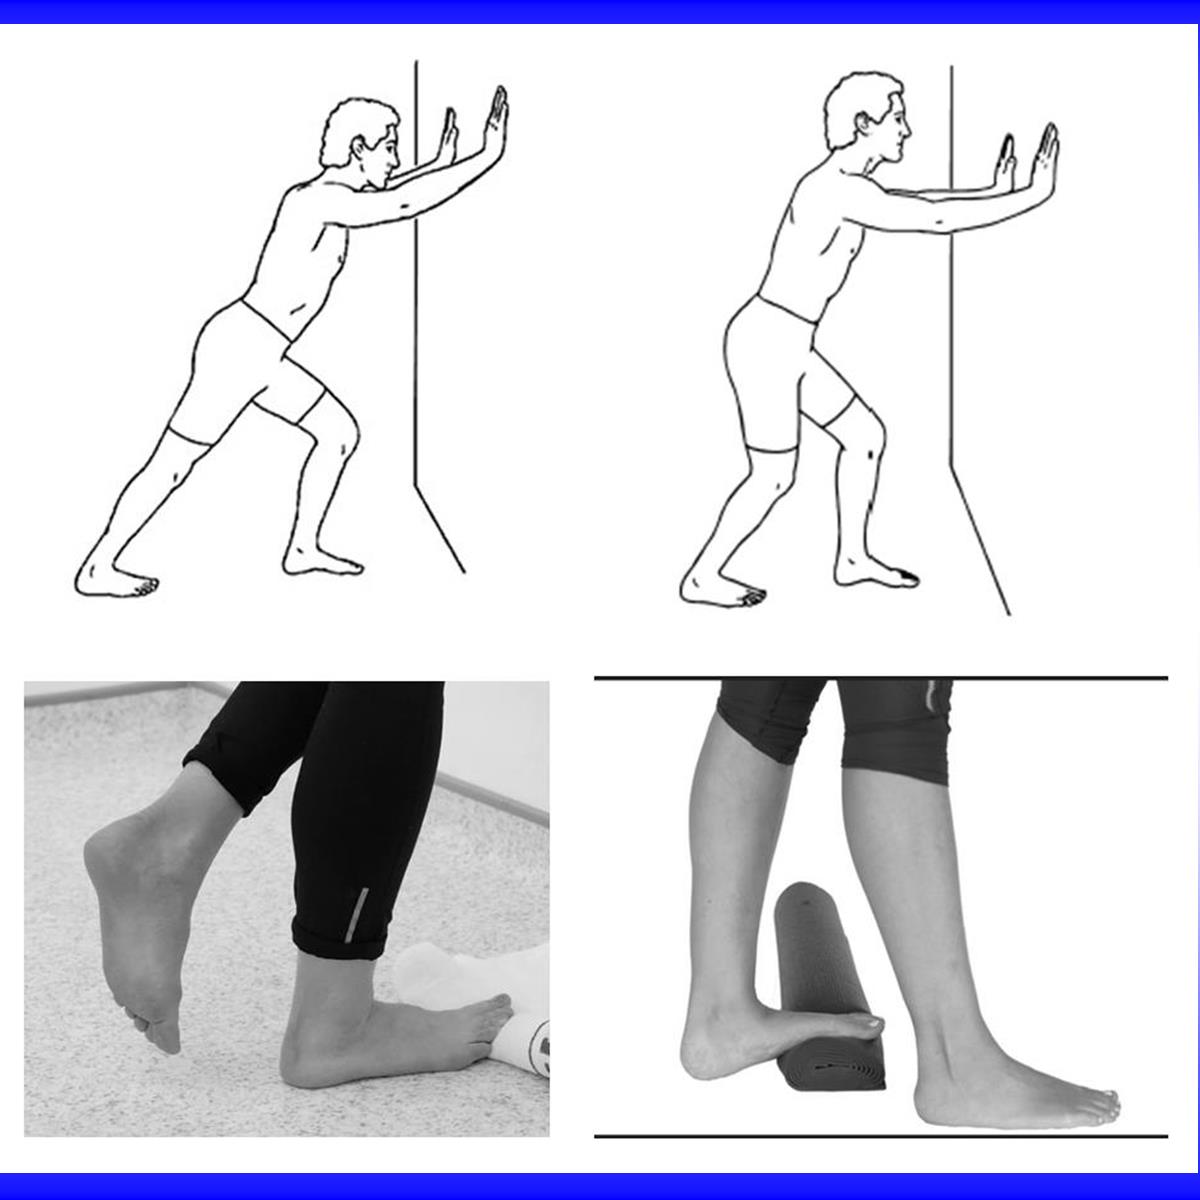 Stretching for Plantar Fasciitis